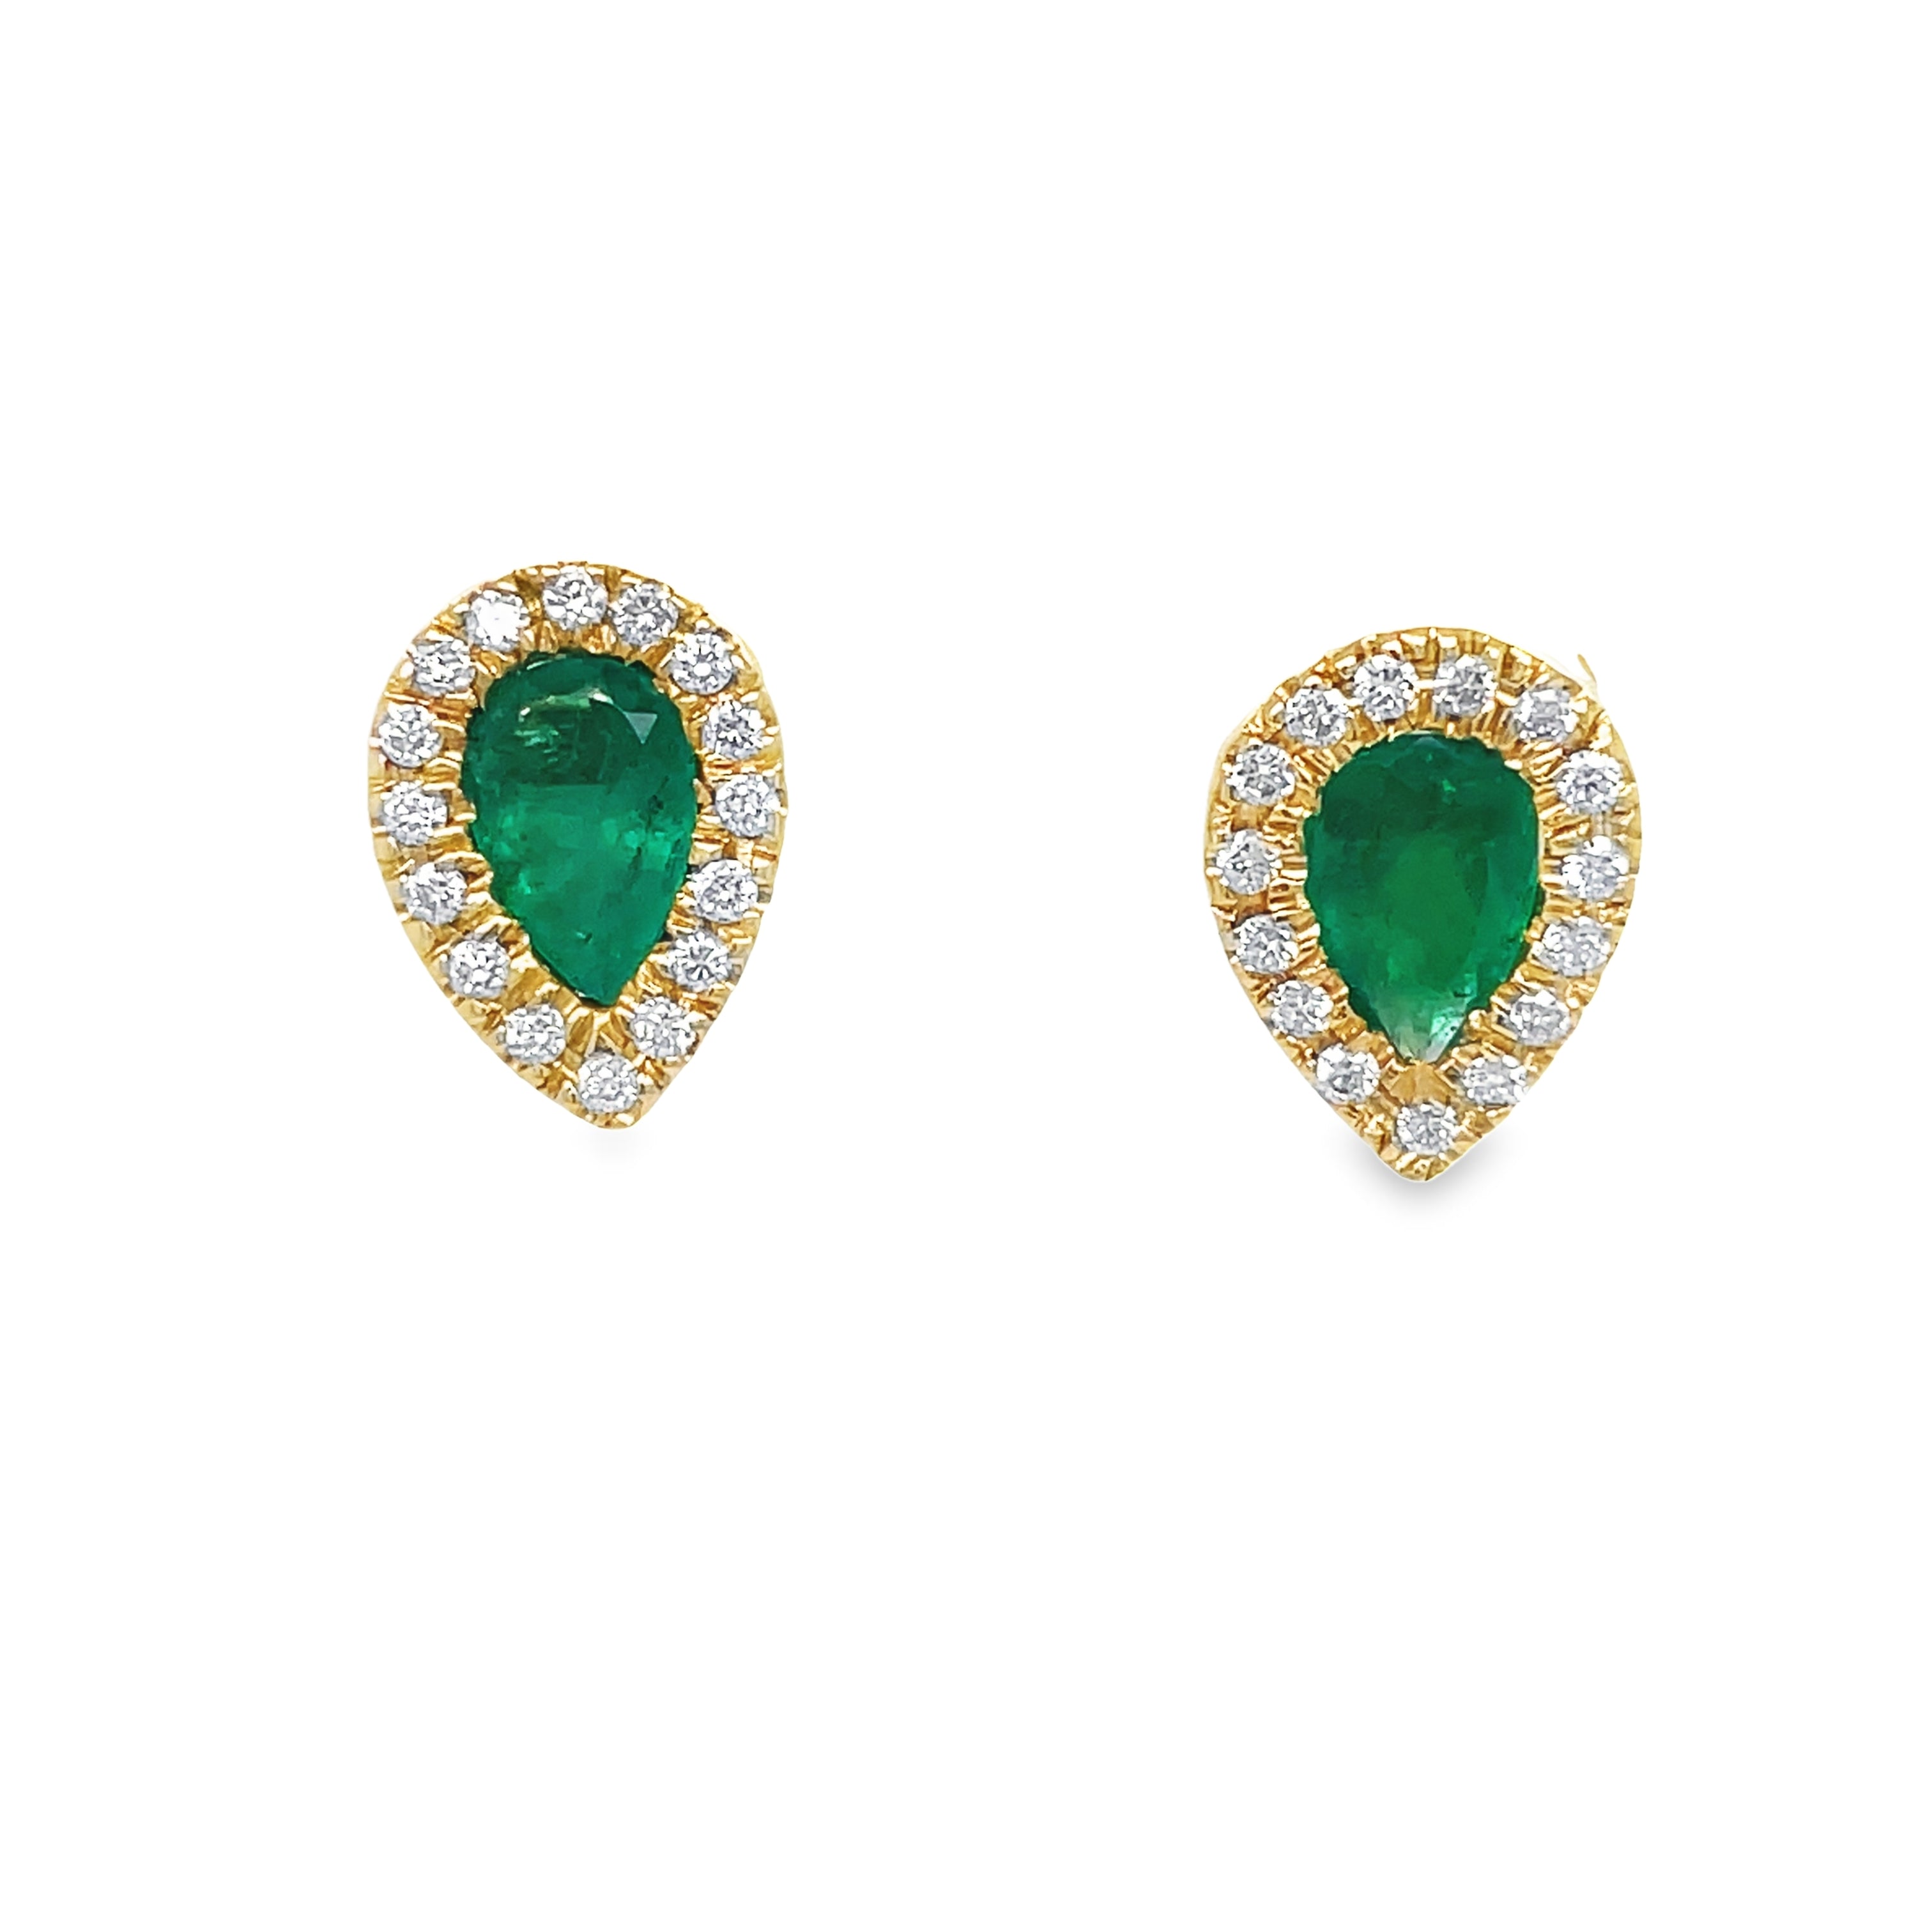 These Colombian Emerald and Diamond Stud Earrings feature a pear shape cut emerald in 18k yellow gold, complimented by round diamonds. This elegant earring set is perfect for those looking to add the perfect combination of sparkle and sophistication to their look. 12.00 x 9.00 mm size&nbsp;